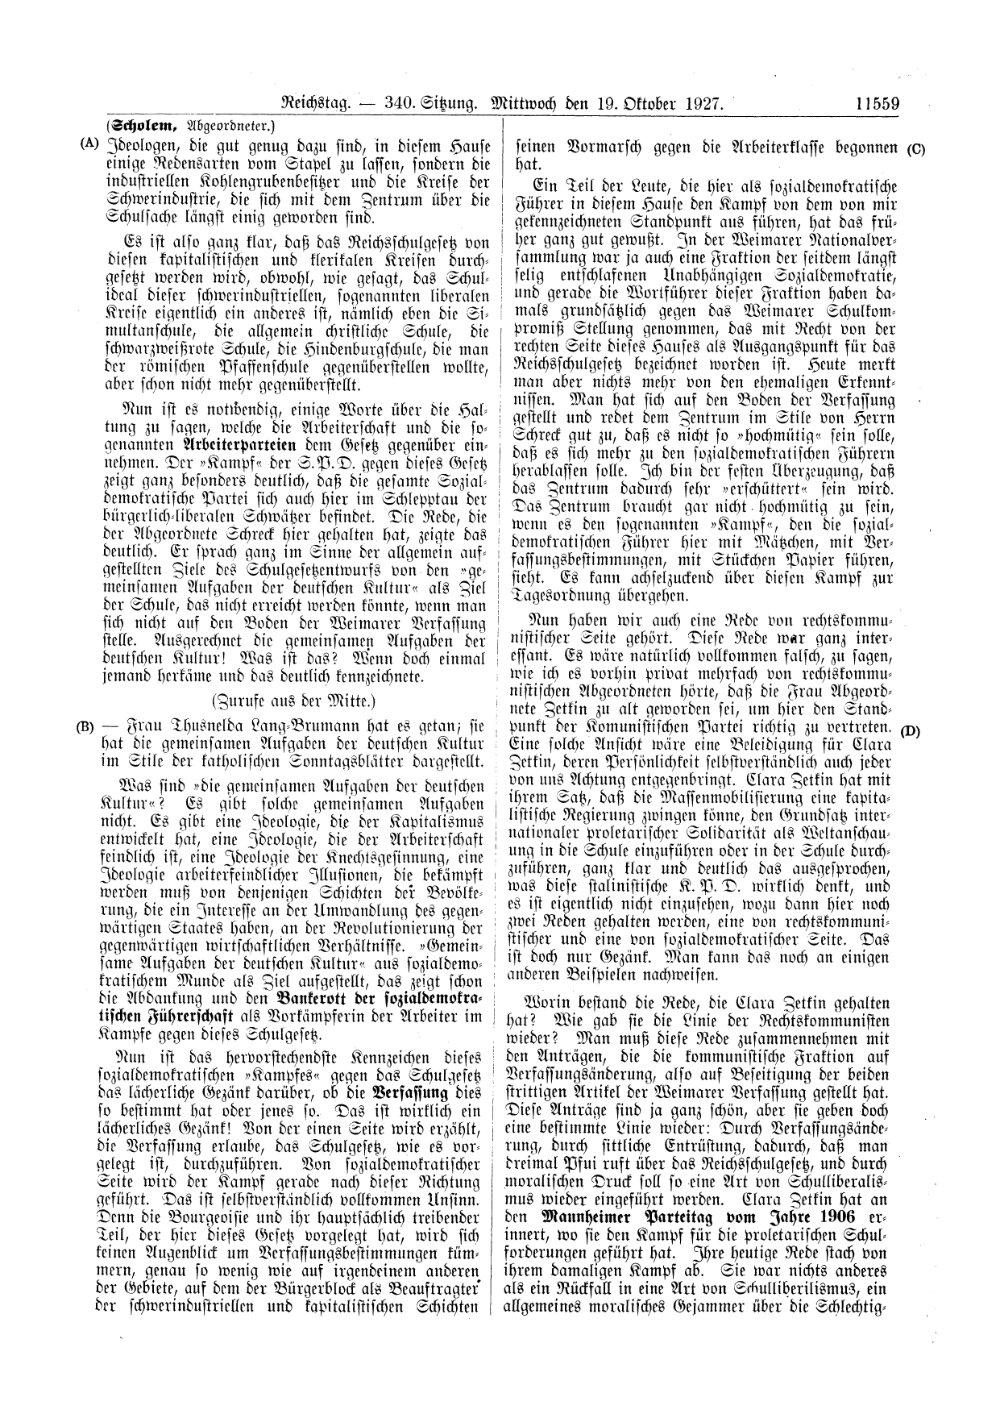 Scan of page 11559